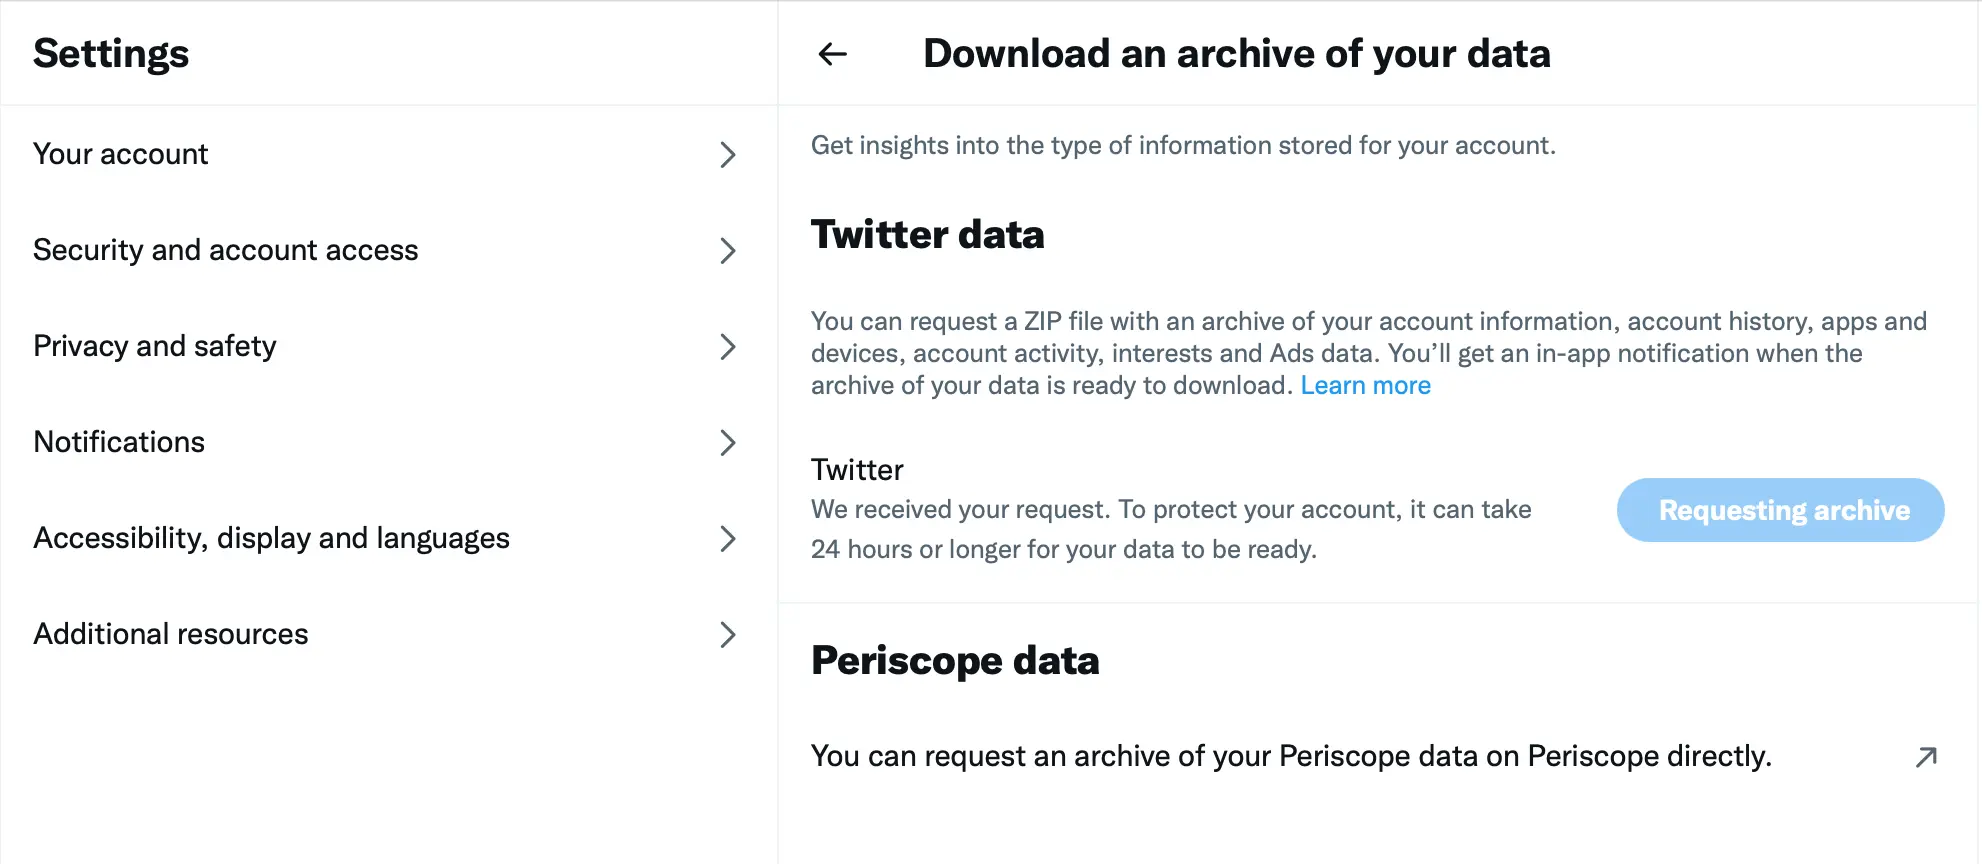 It will take some time before Twitter prepares the archive